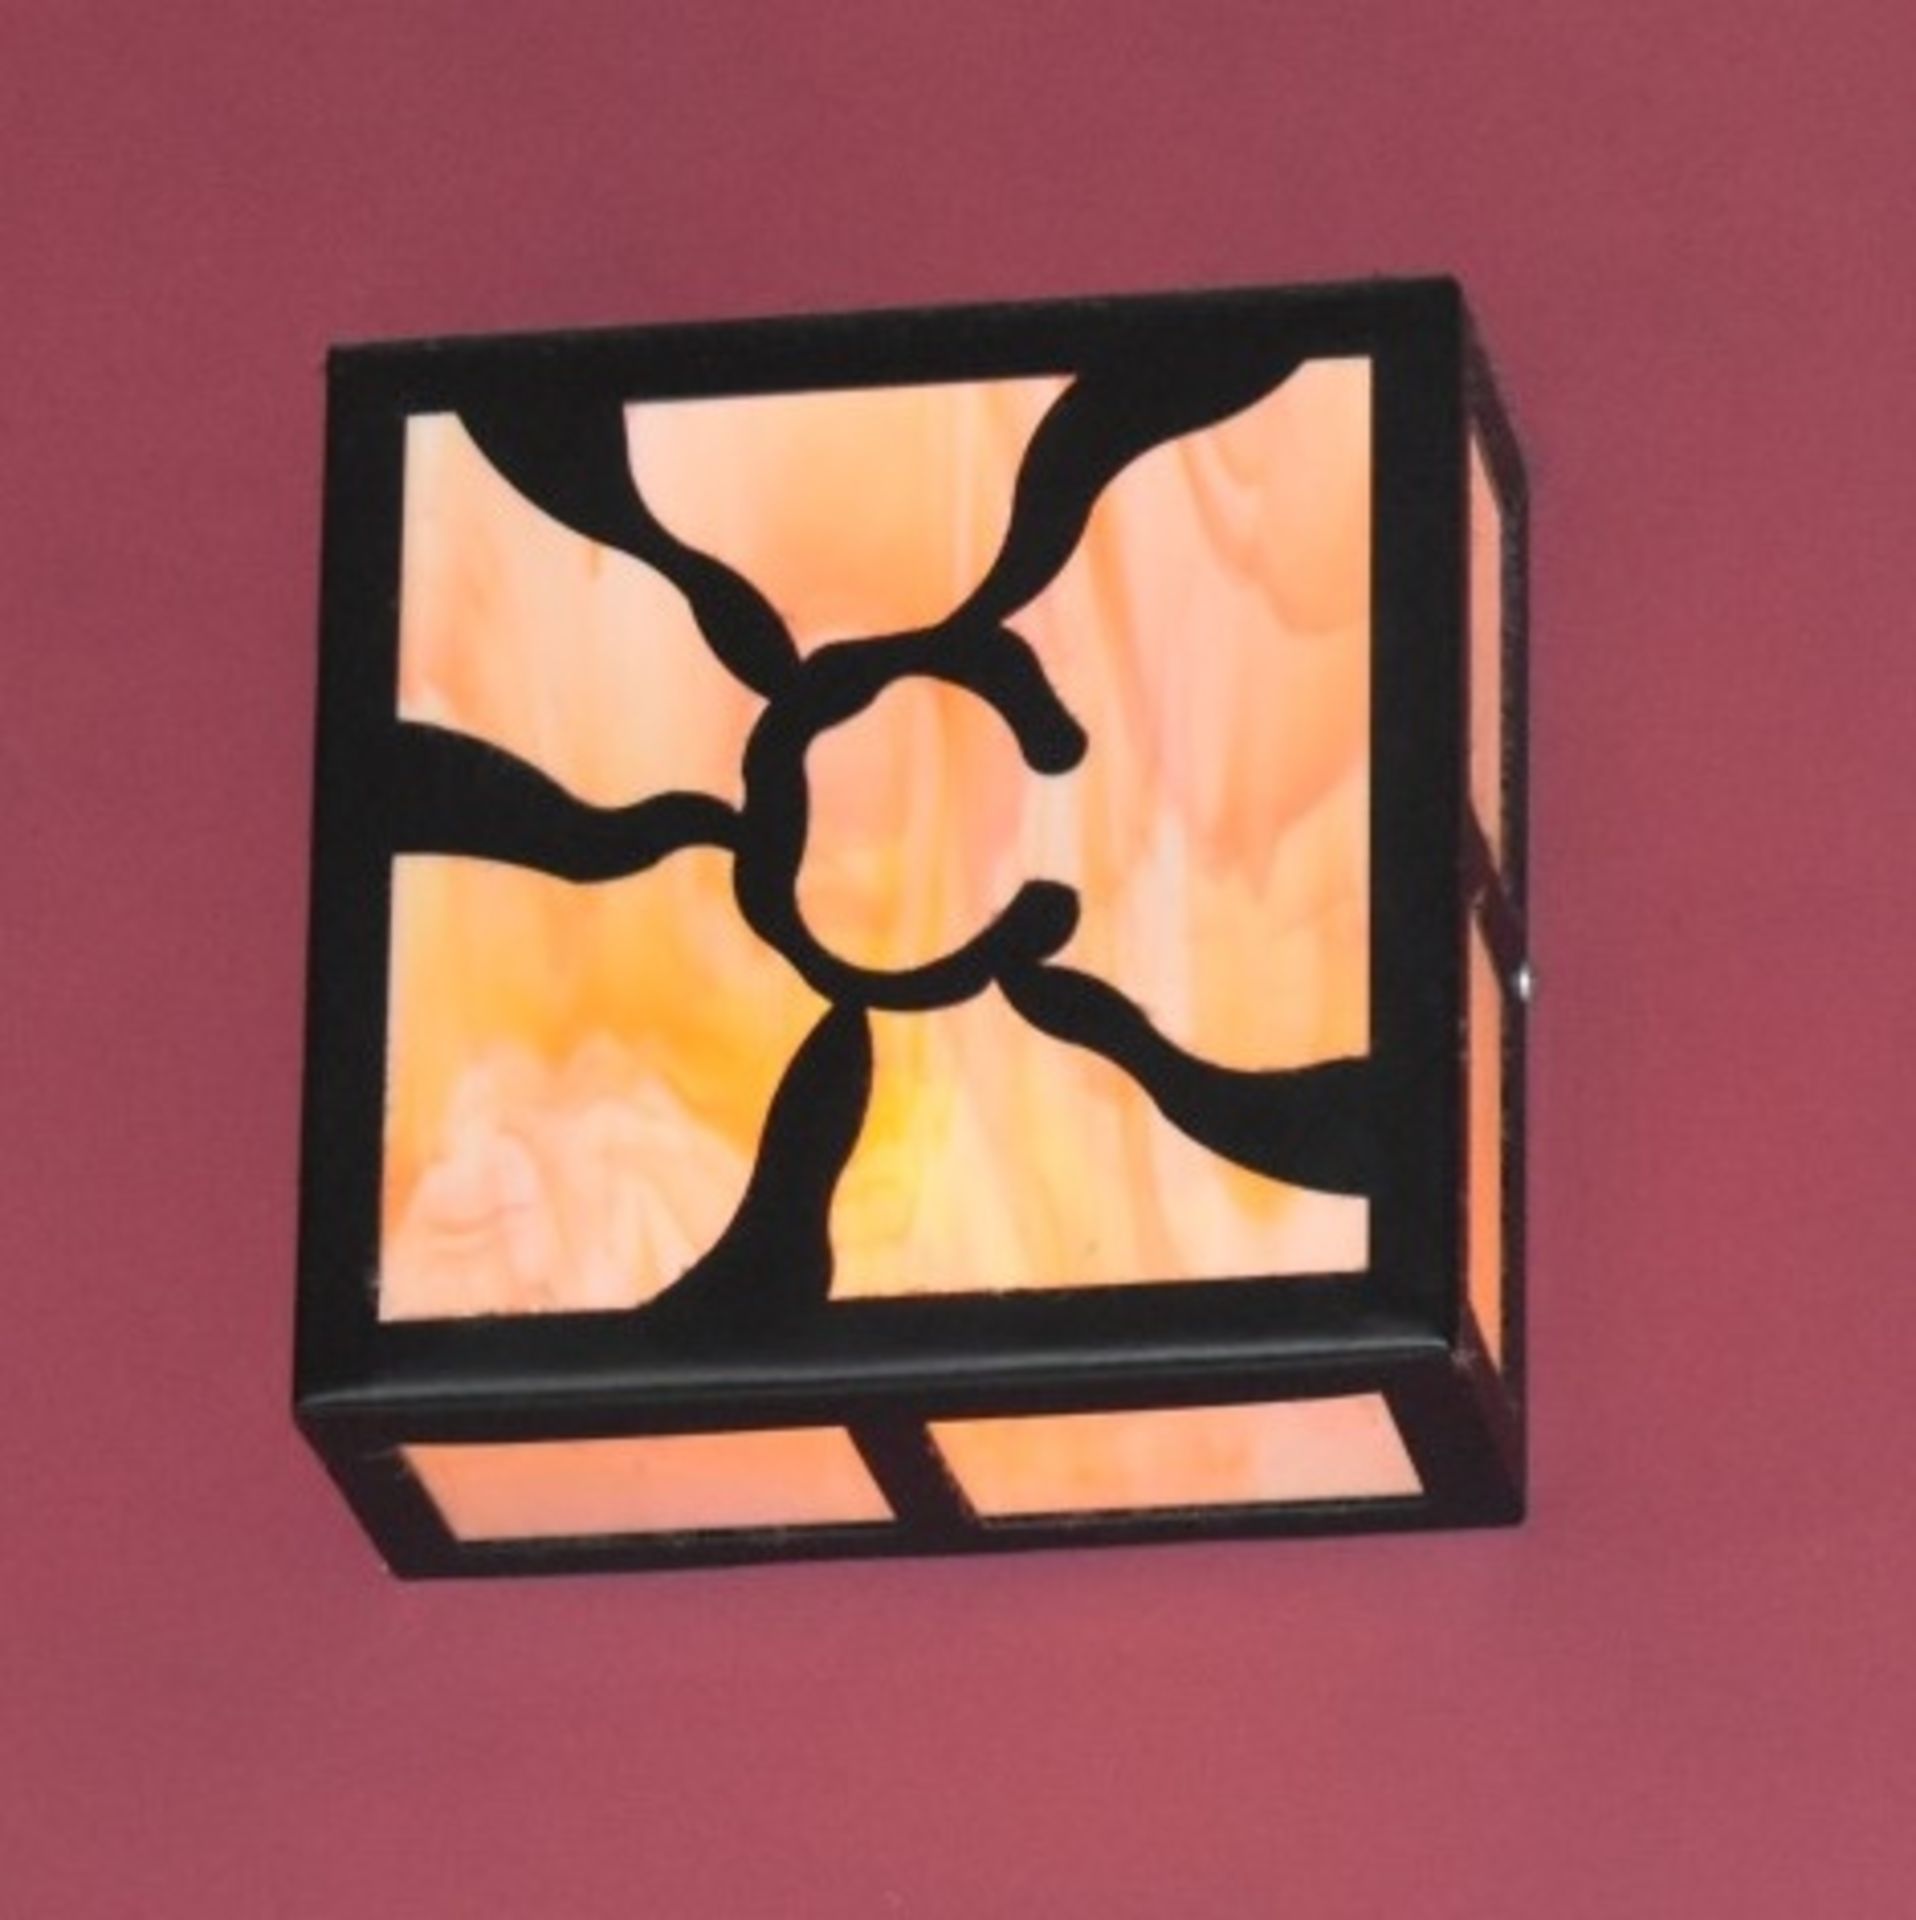 7 x Contemporary Wall / Ceiling Light Fittings - CL423 GF - From a Popular Mexican Themed Restaurant - Image 4 of 5